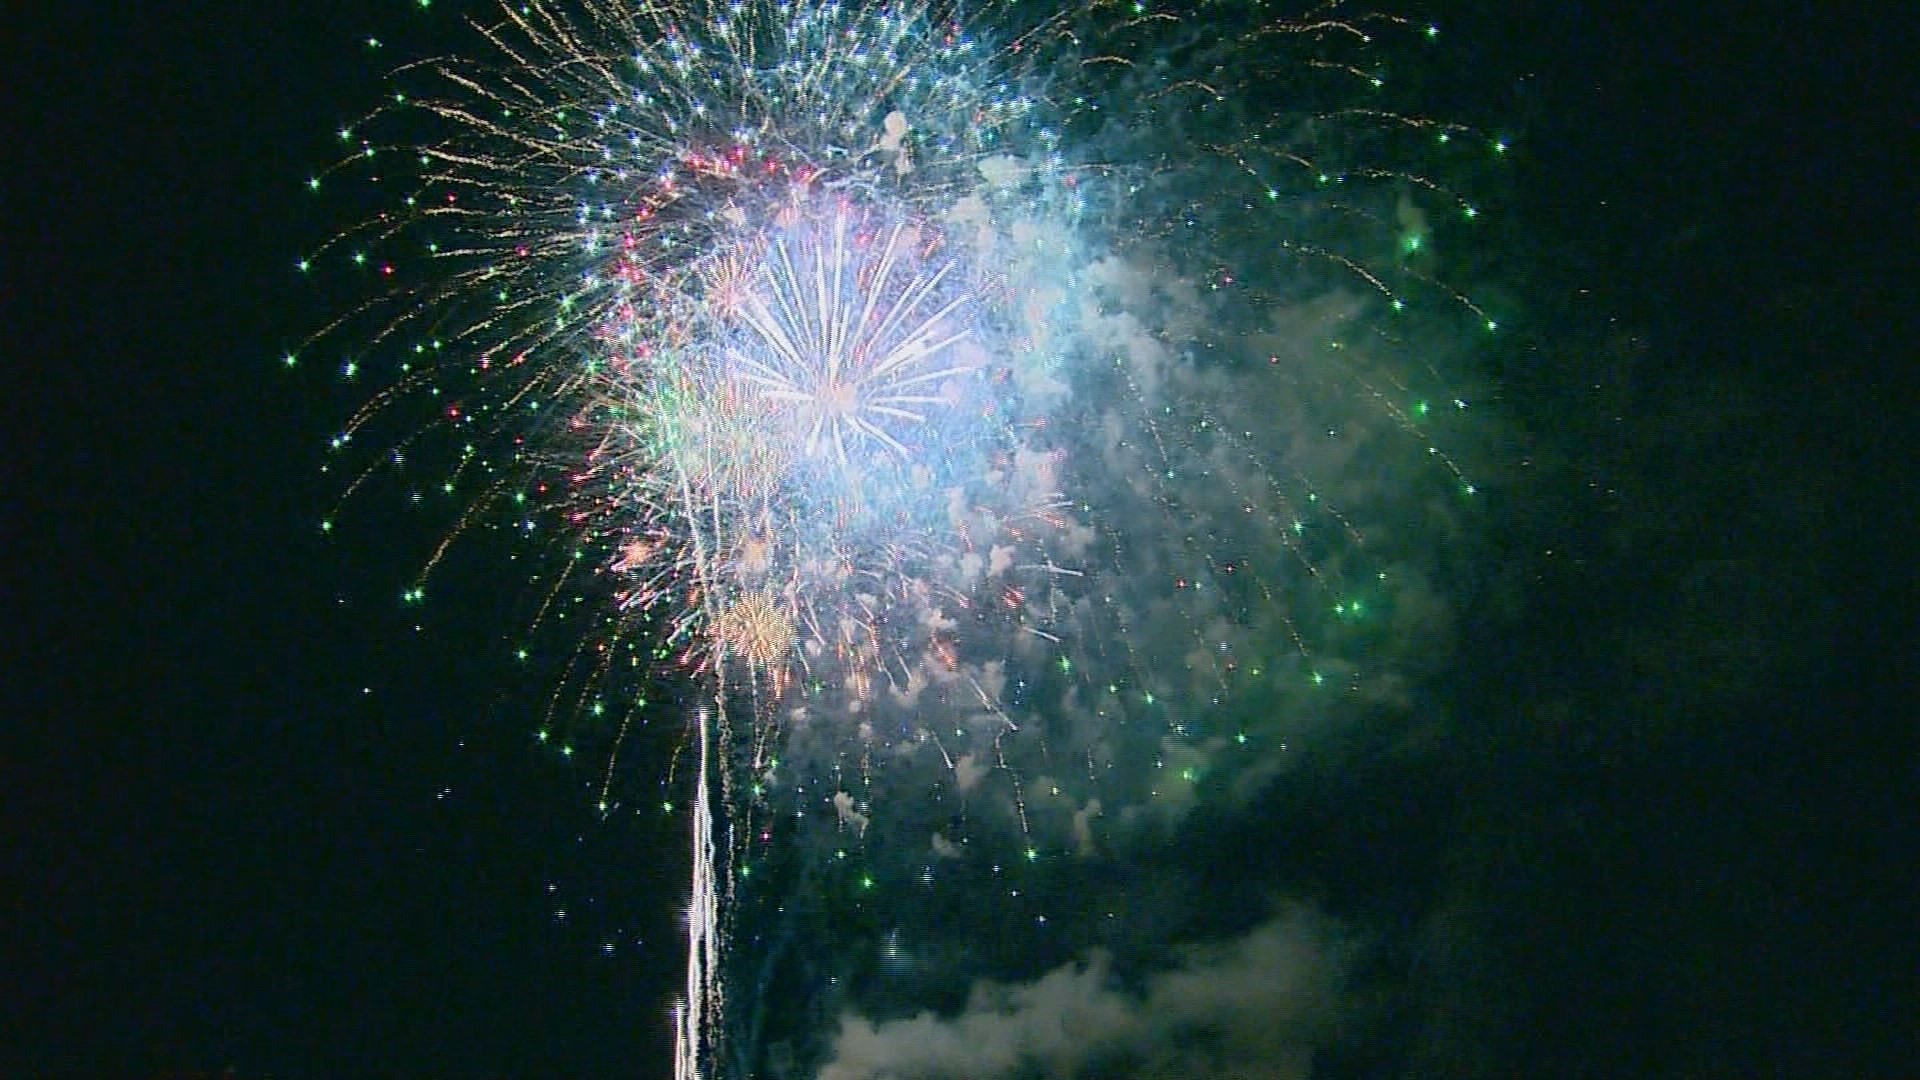 Organizers say the Addison fireworks display will be 30% larger than last year's.